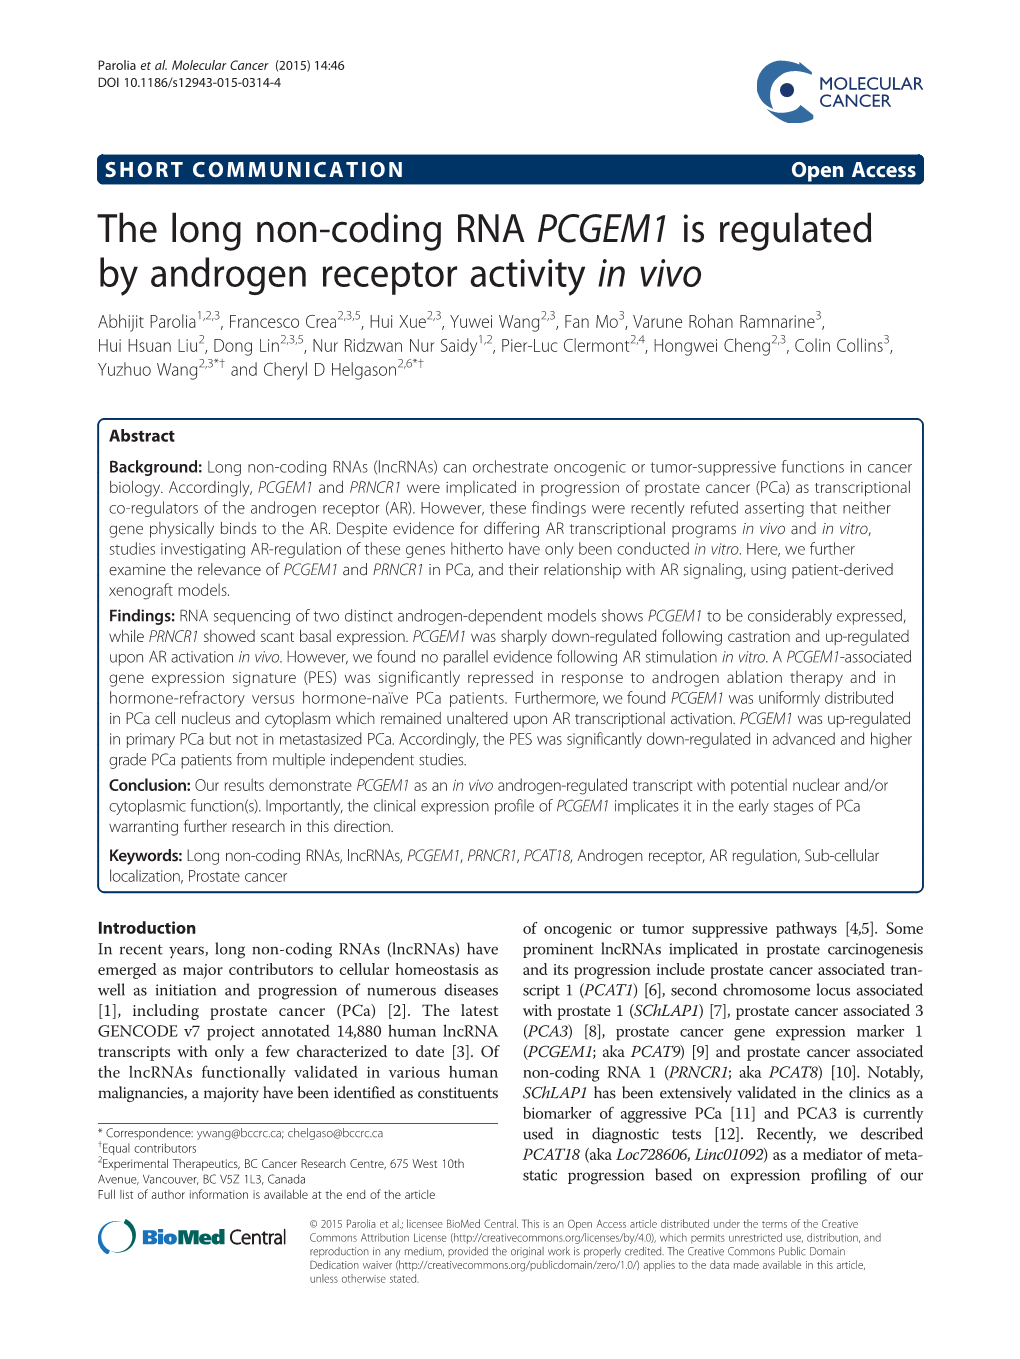 The Long Non-Coding RNA PCGEM1 Is Regulated by Androgen Receptor